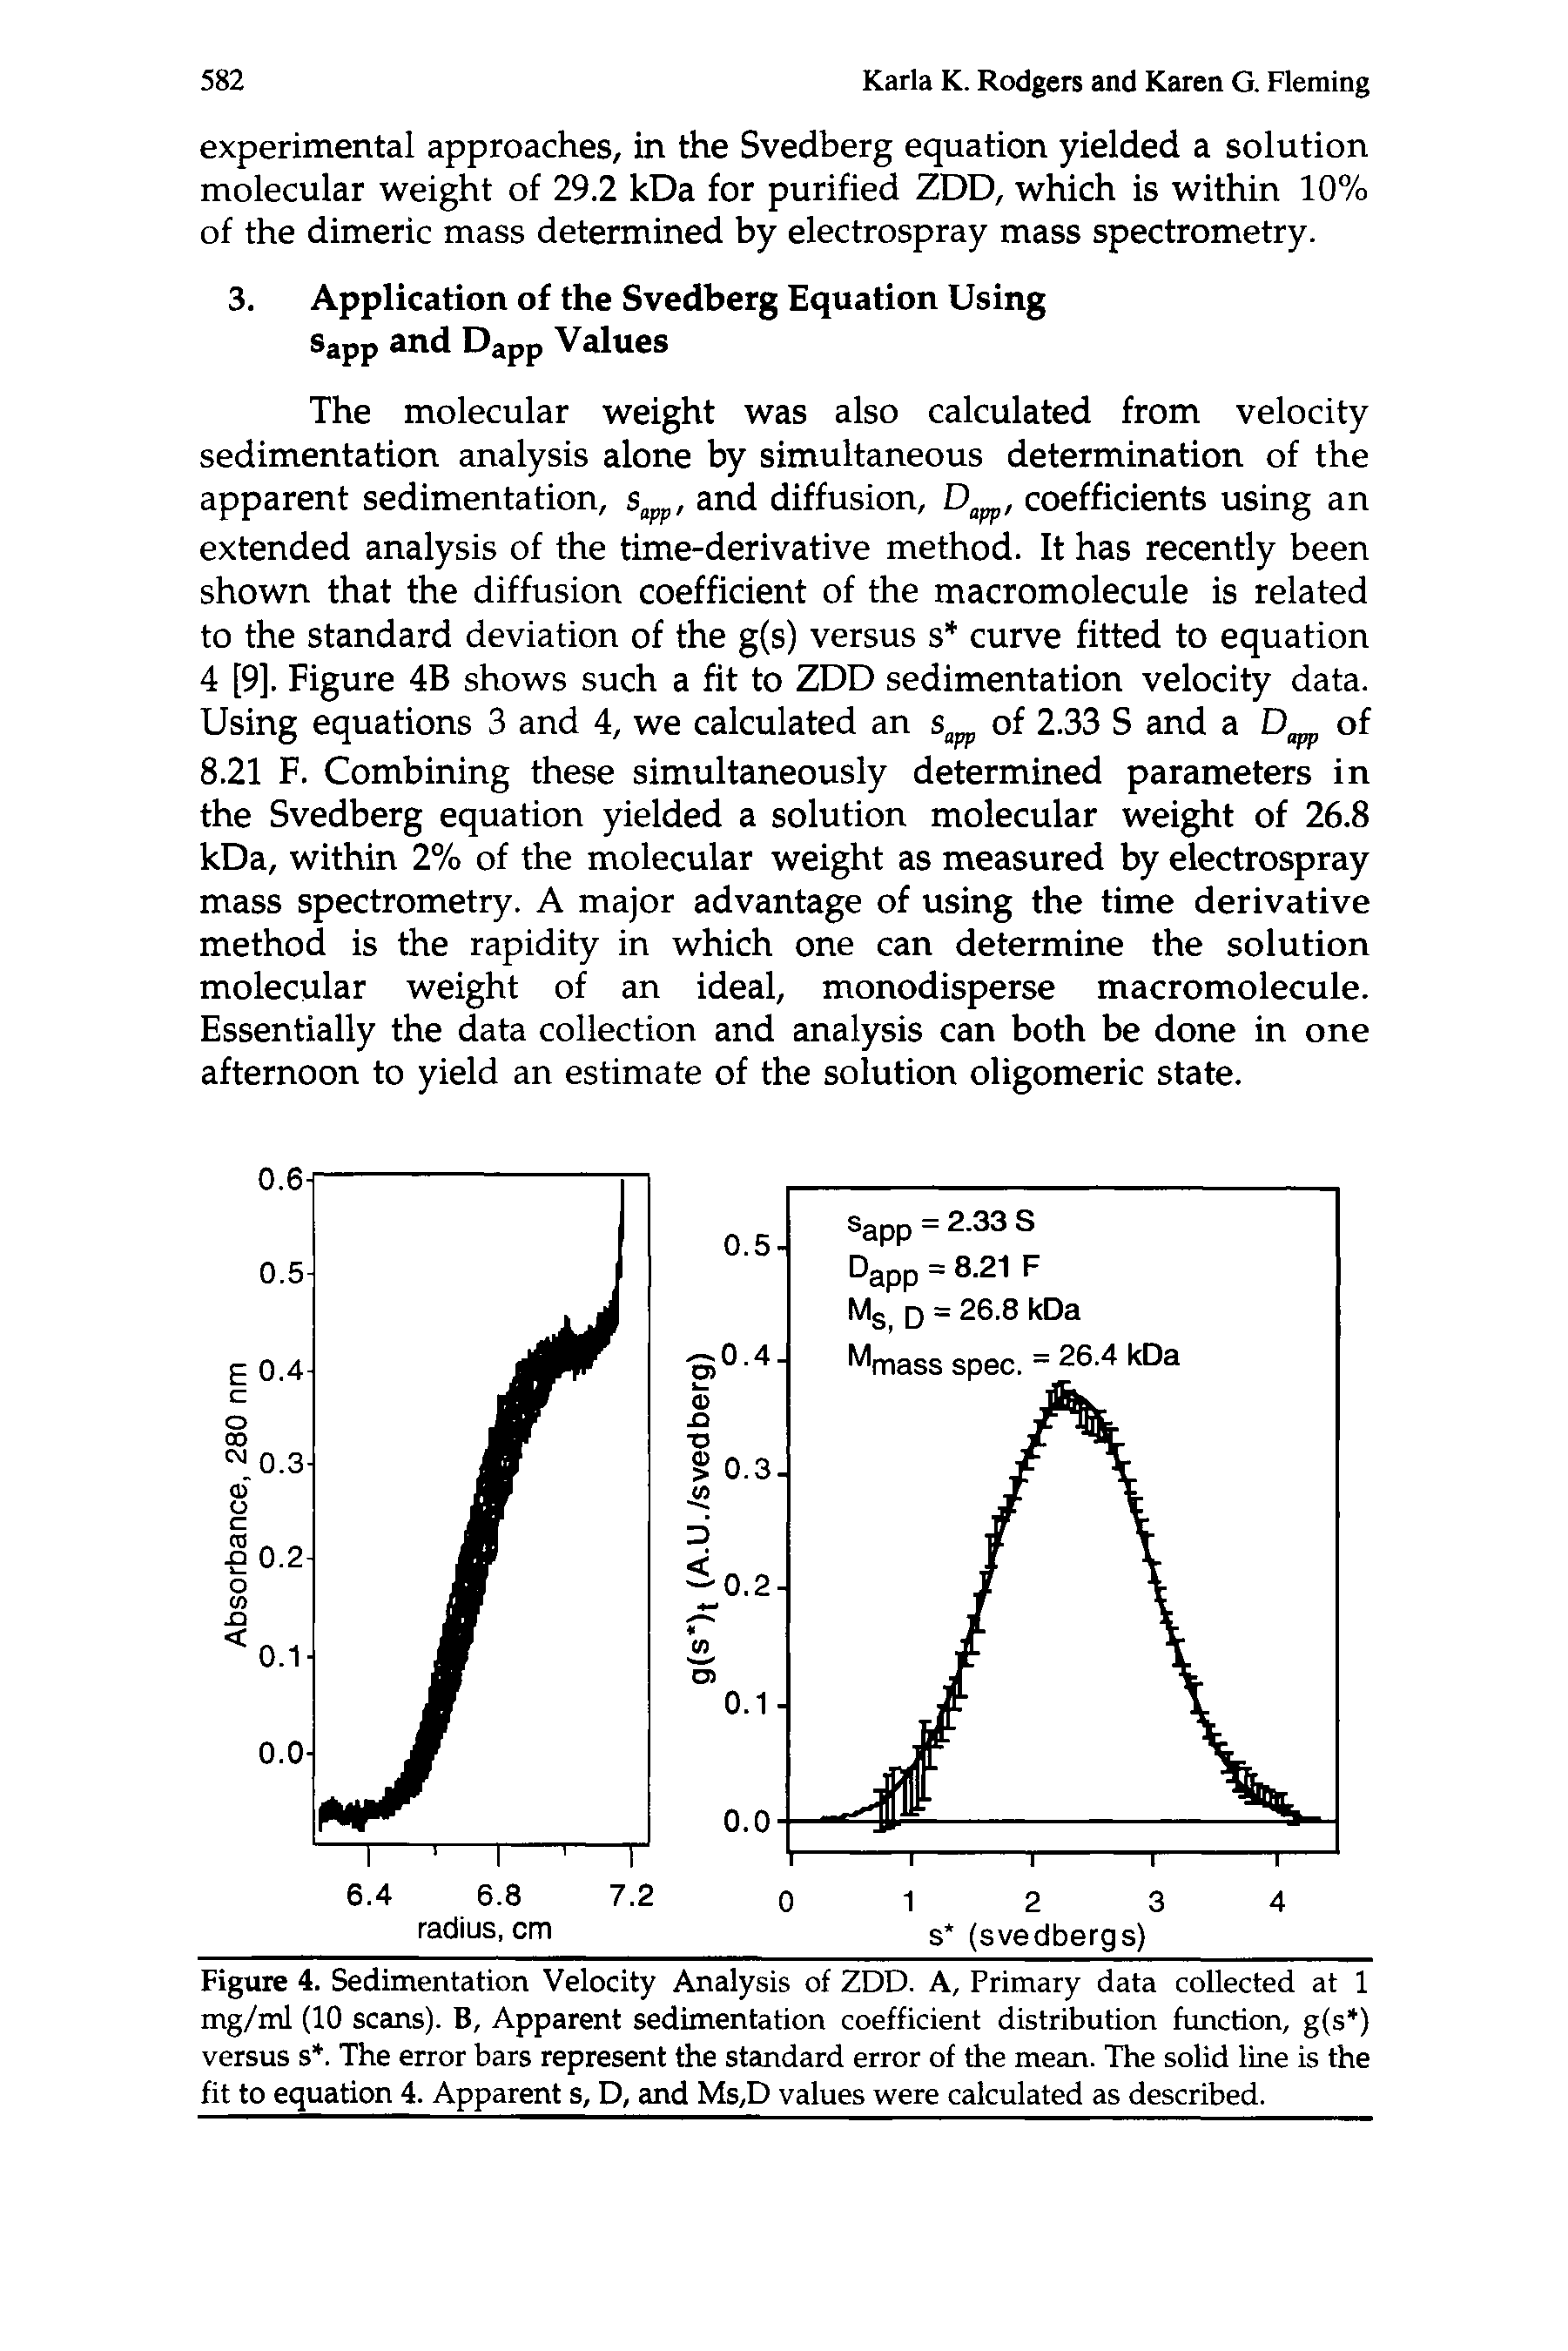 Figure 4. Sedimentation Velocity Analysis of ZDD. A, Primary data collected at 1 mg/ml (10 scans). B, Apparent sedimentation coefficient distribution function, g(s ) versus s. The error bars represent the standard error of the mean. The solid line is the fit to equation 4. Apparent s, D, and Ms,D values were calculated as described.